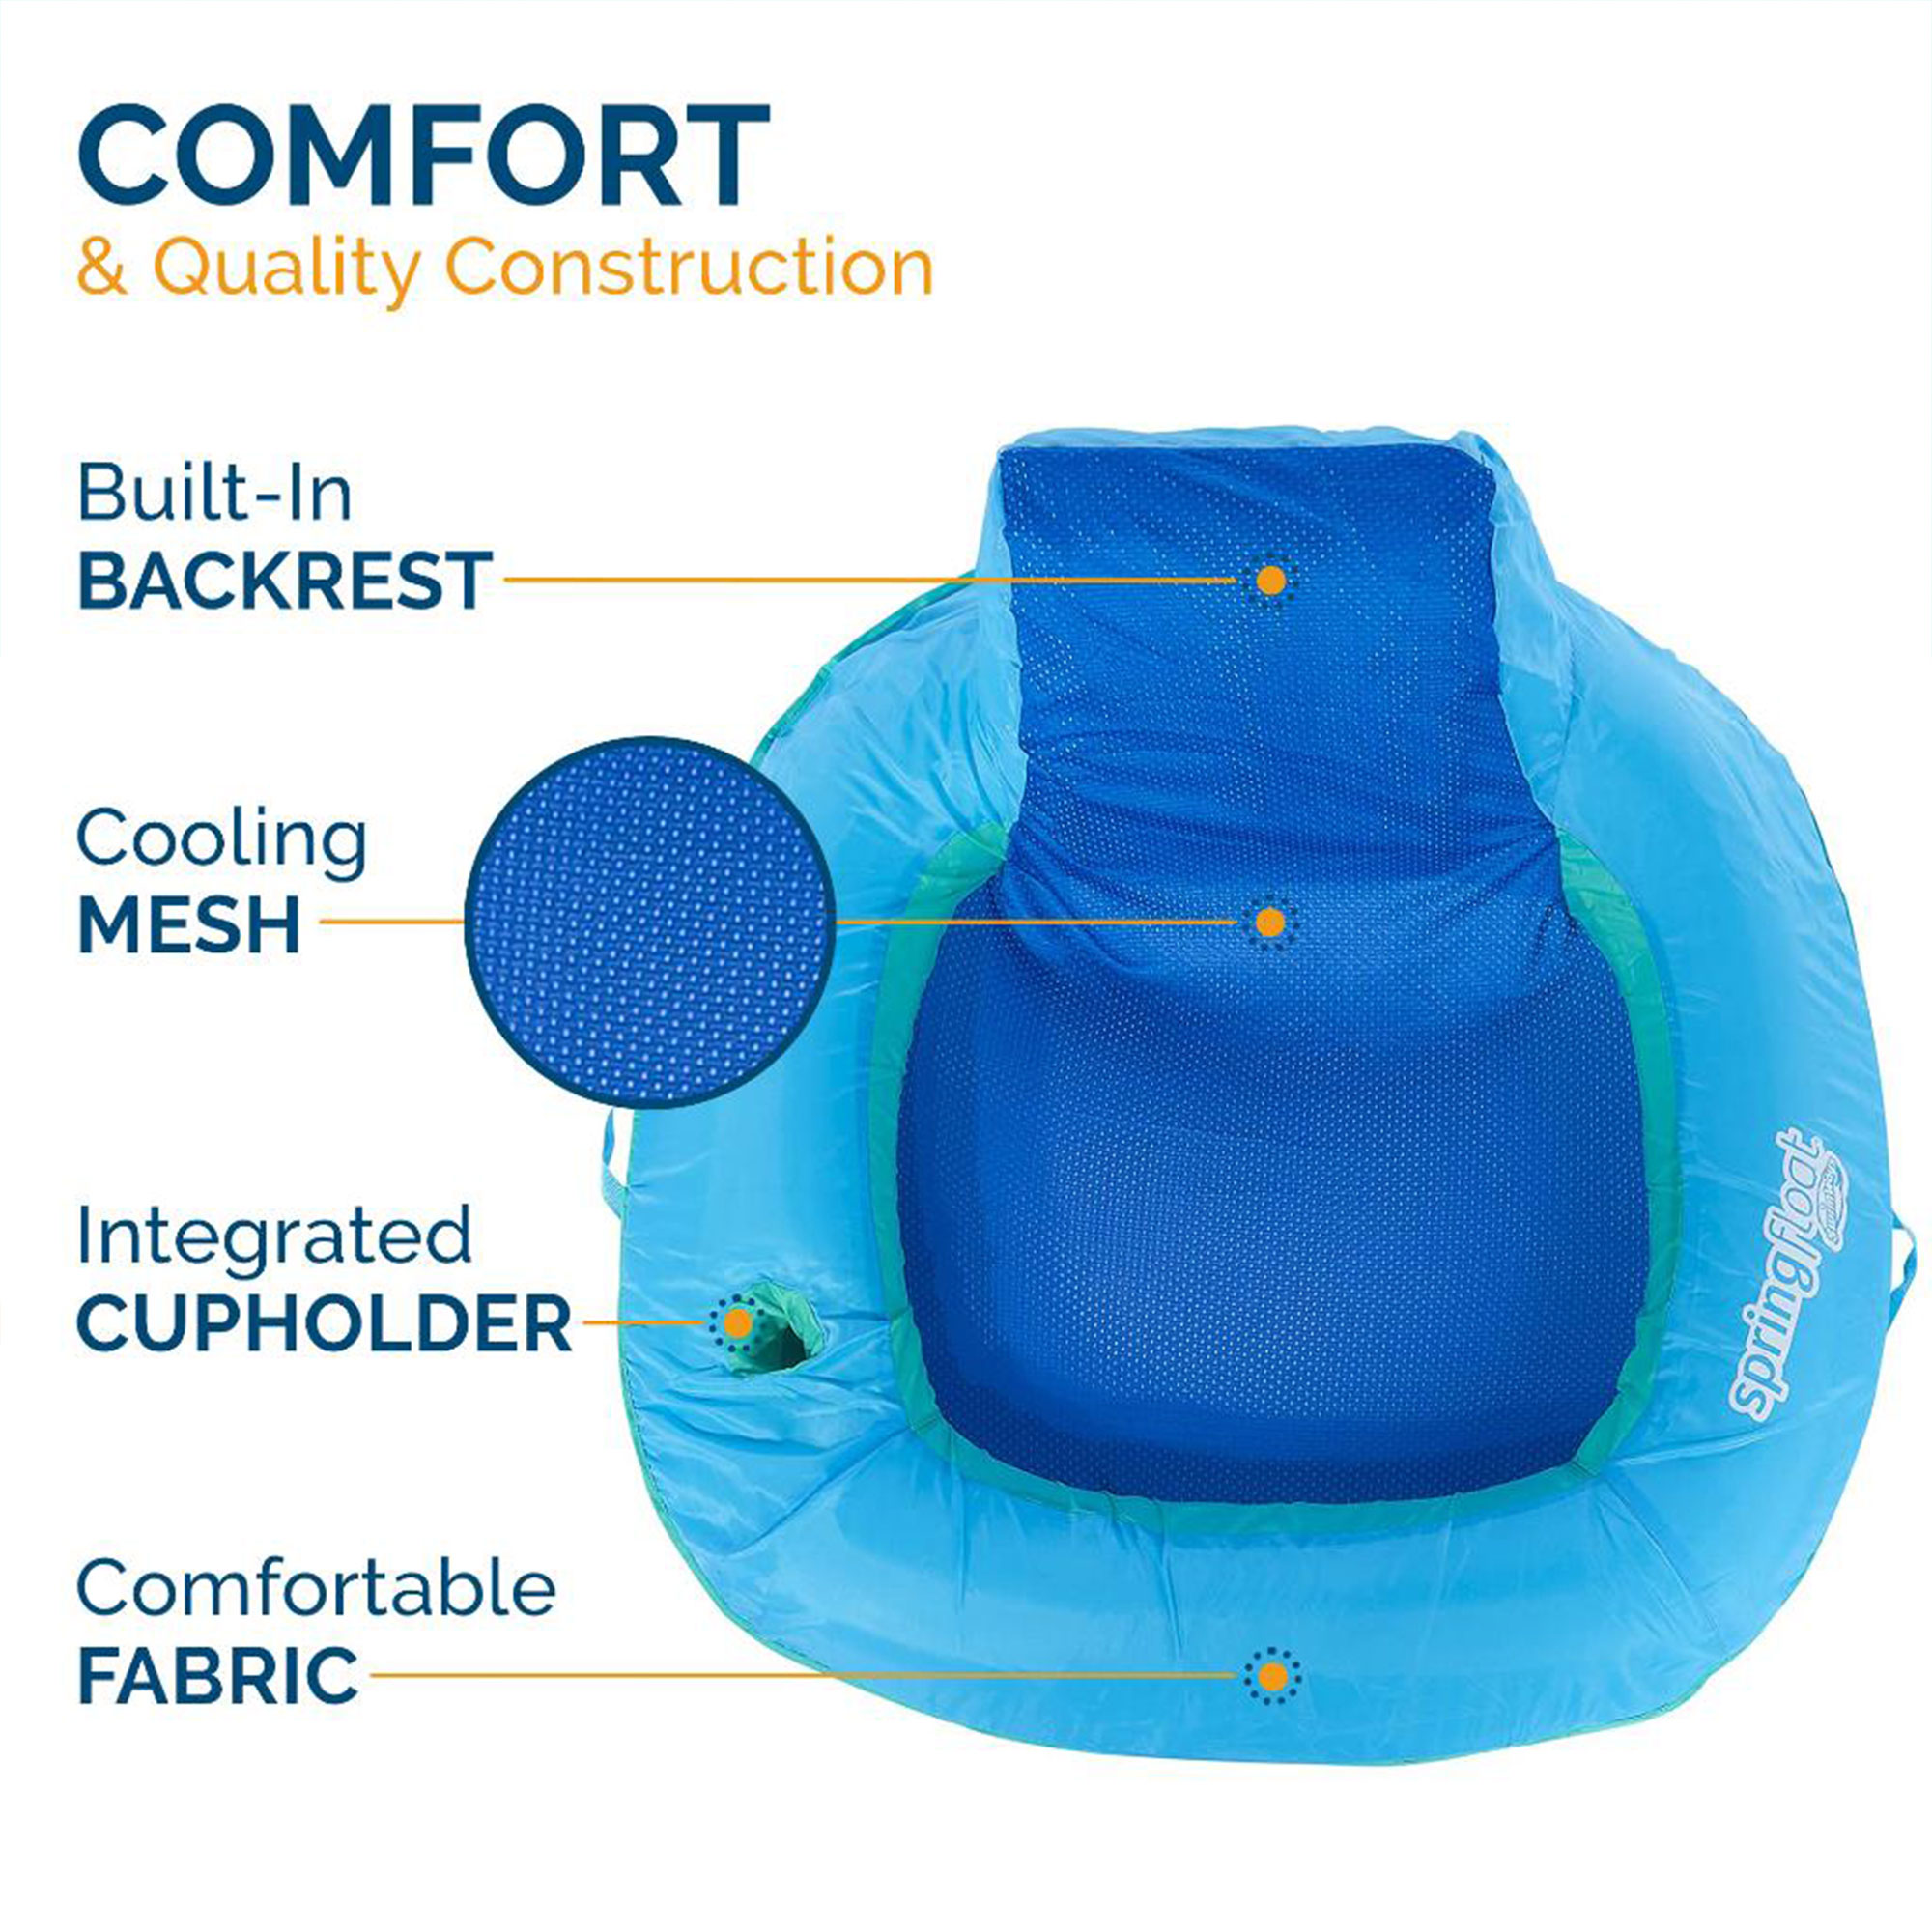 SwimWays SunSeat Floating Inflatable Swimming Pool Lounge Chair w/Armrests, Backrests, and Cup Holder, Dark Blue - image 5 of 8